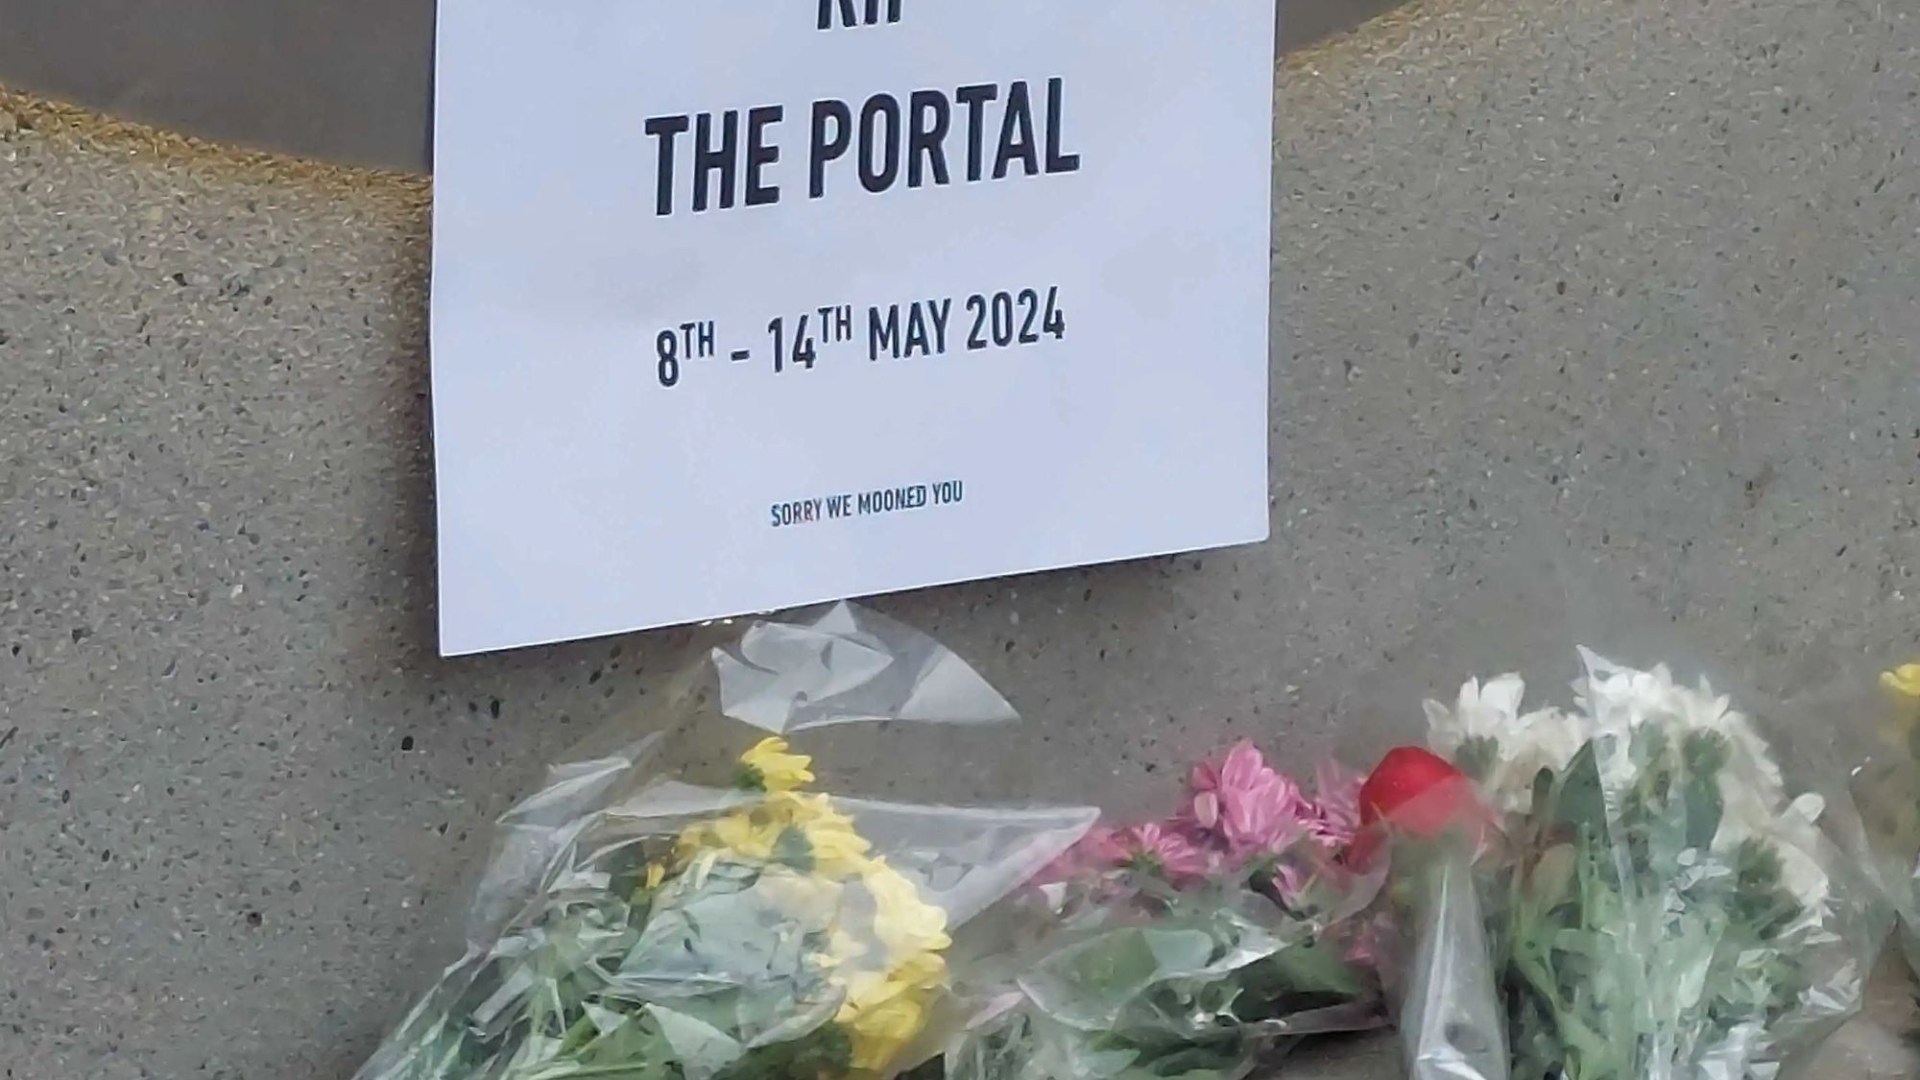 ‘Sorry we mooned you’ – Floral tributes lain at foot of Dublin portal during ‘special funeral’ after livestream shut off [Video]